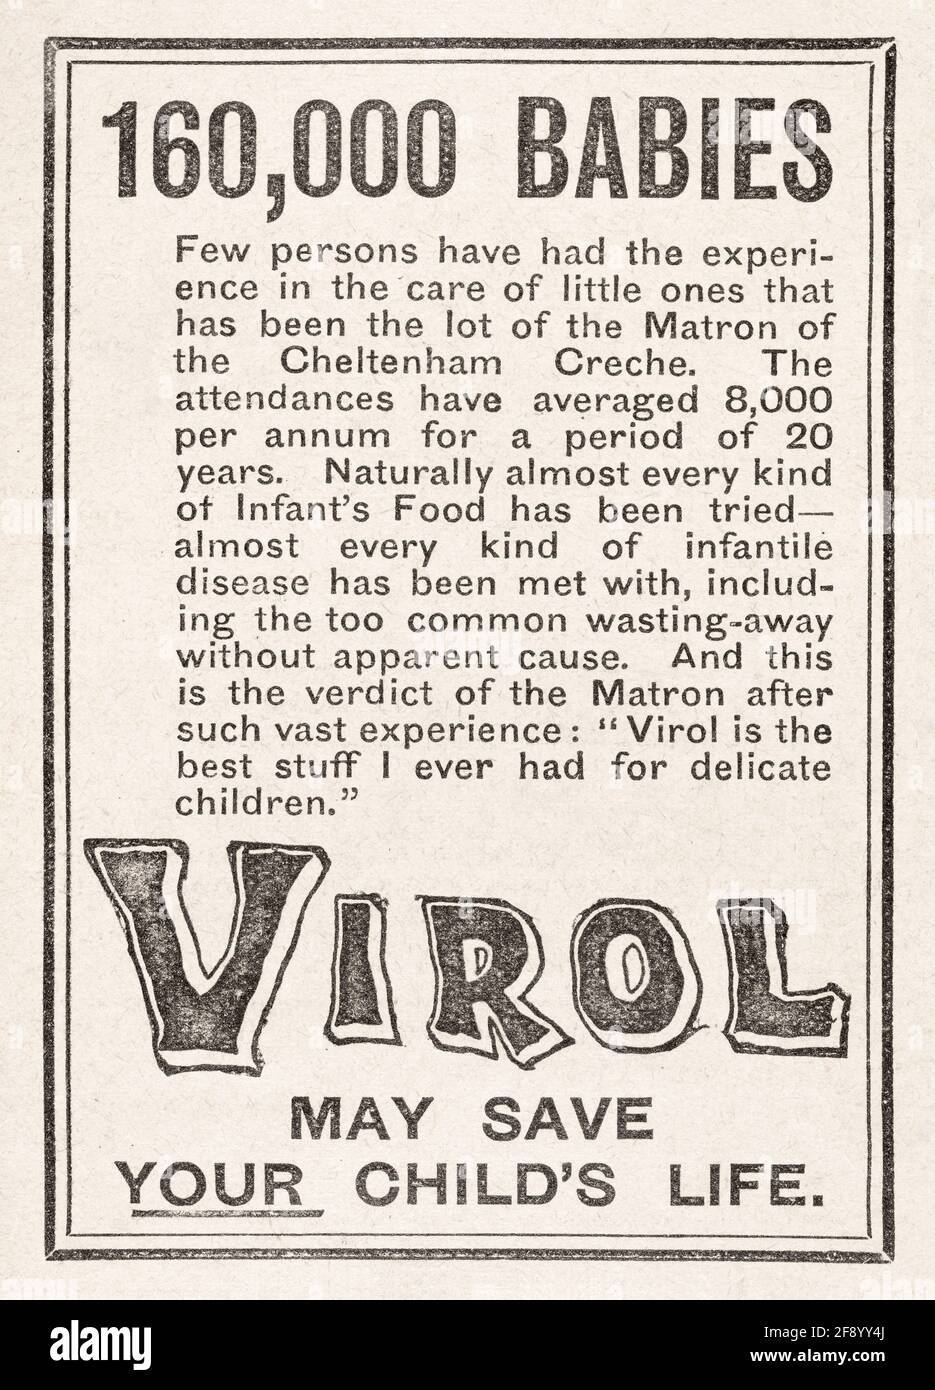 Old Virol baby food advert from 1901 - before the dawn of advertising standards. History of advertising, old health food adverts, medicinal cuisine. Stock Photo